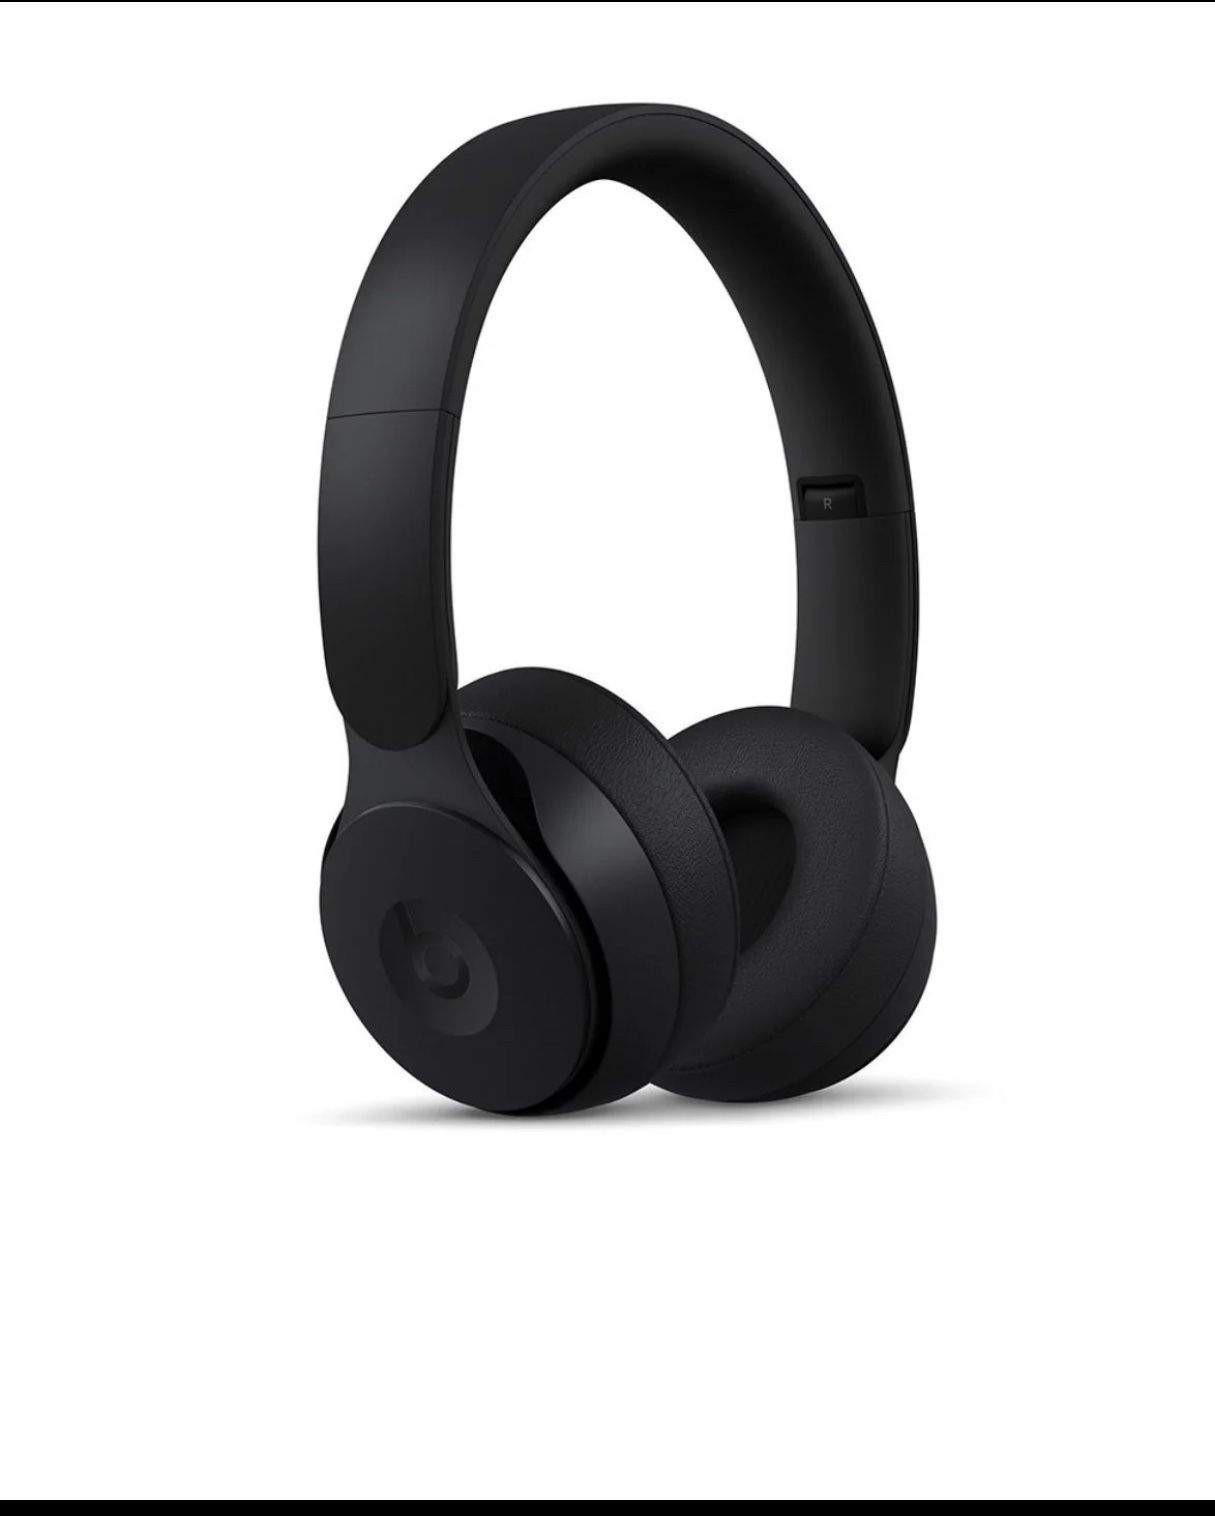 BRAND NEW ..Beats Solo Pro Wireless Noise Cancelling On-Ear Headphones with Apple H1 Headphone Chip - Black